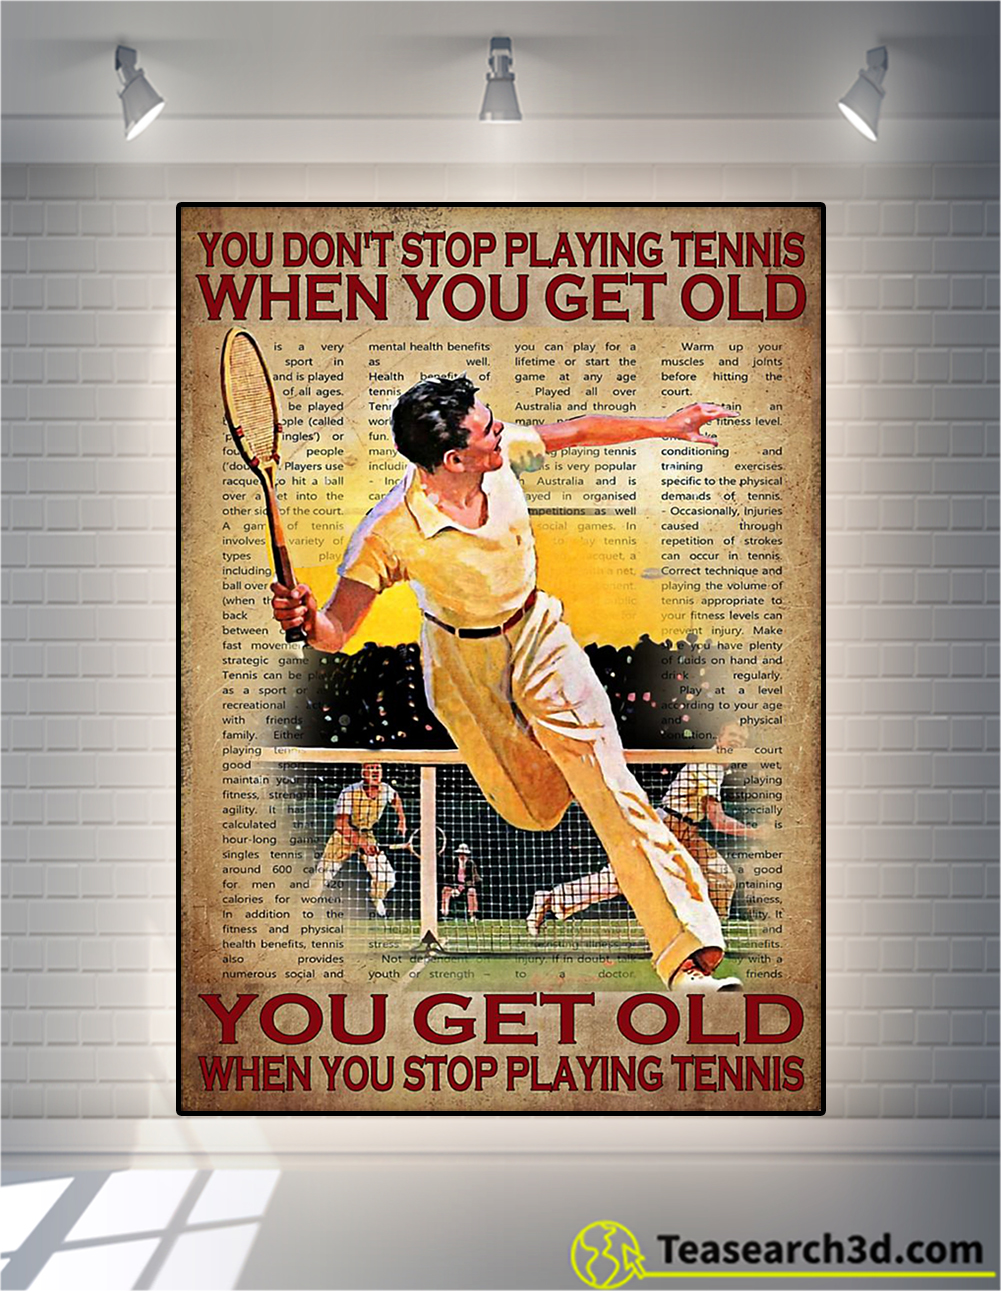 You don't stop playing tennis when you get old poster